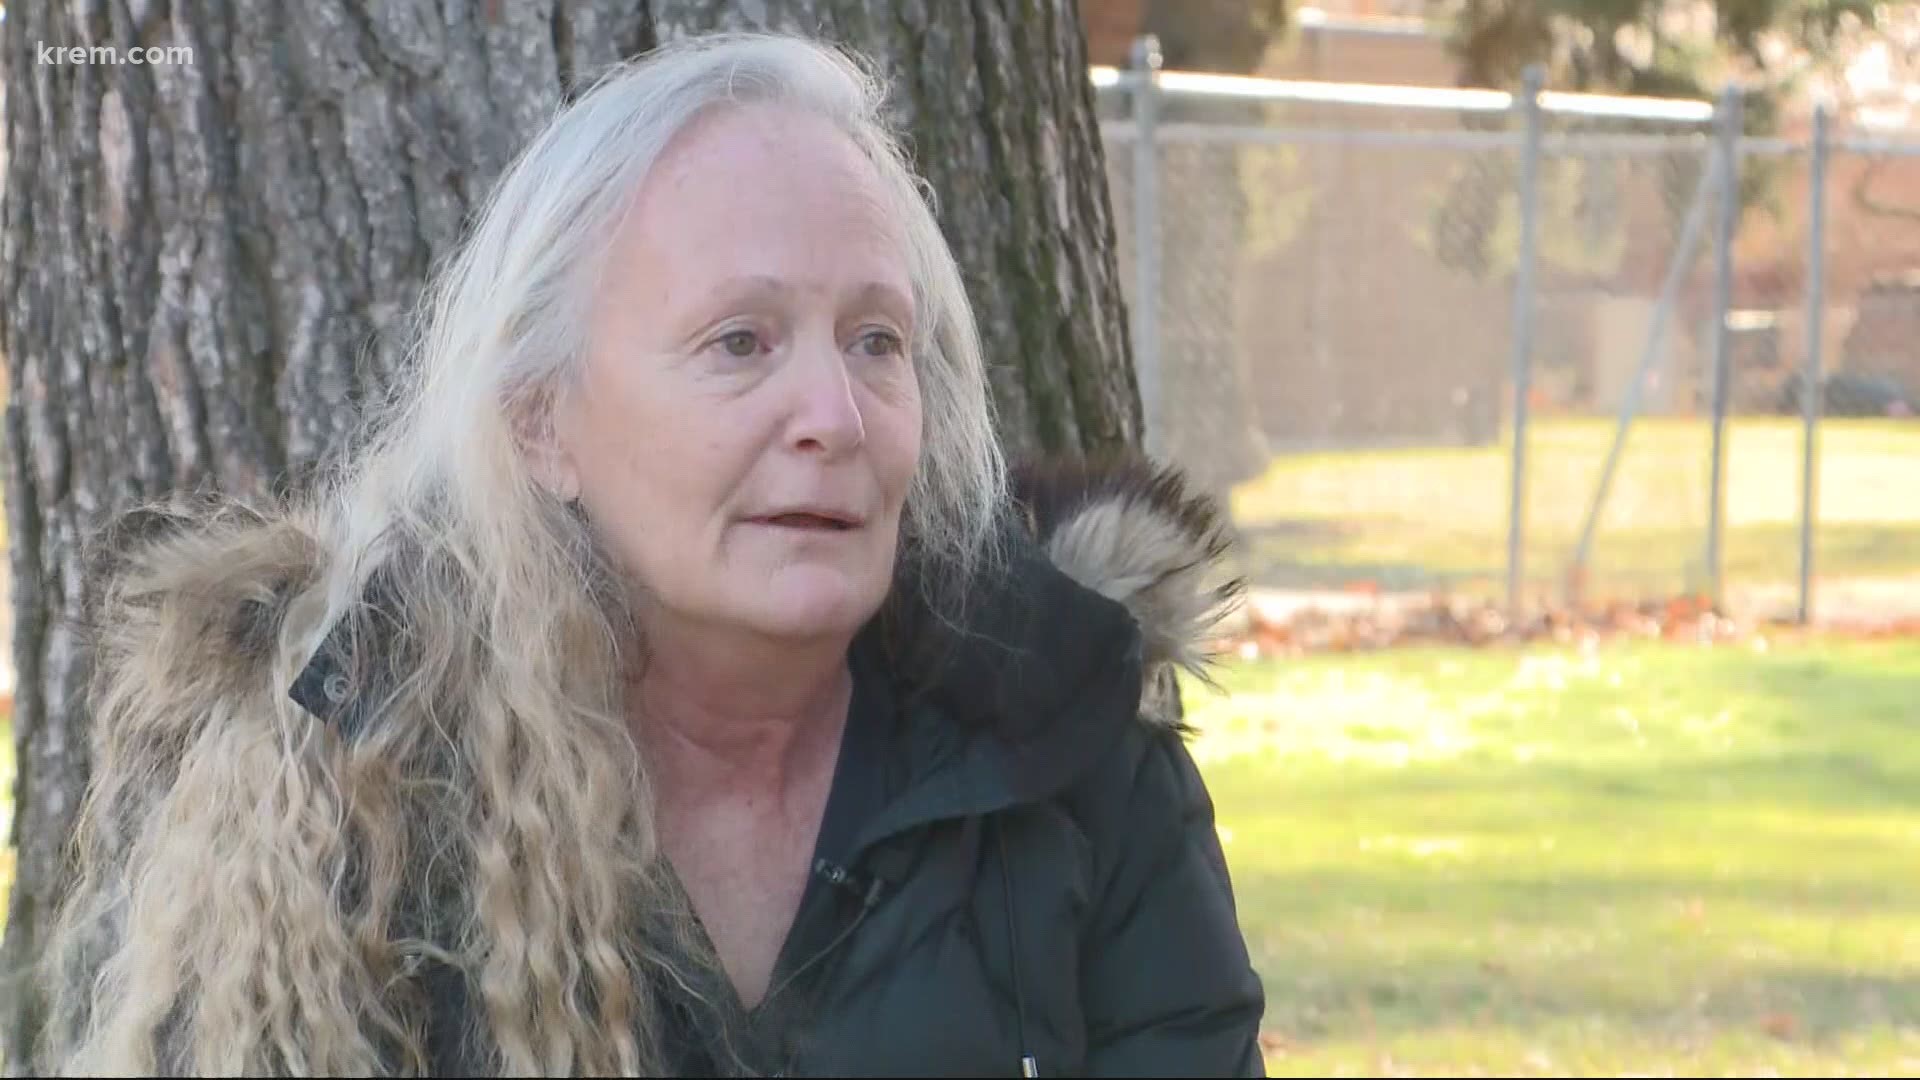 Jeanne Dixon bought the dog that her daughter wanted before she passed away, but it turned out she has been scammed out of more than $2,000.